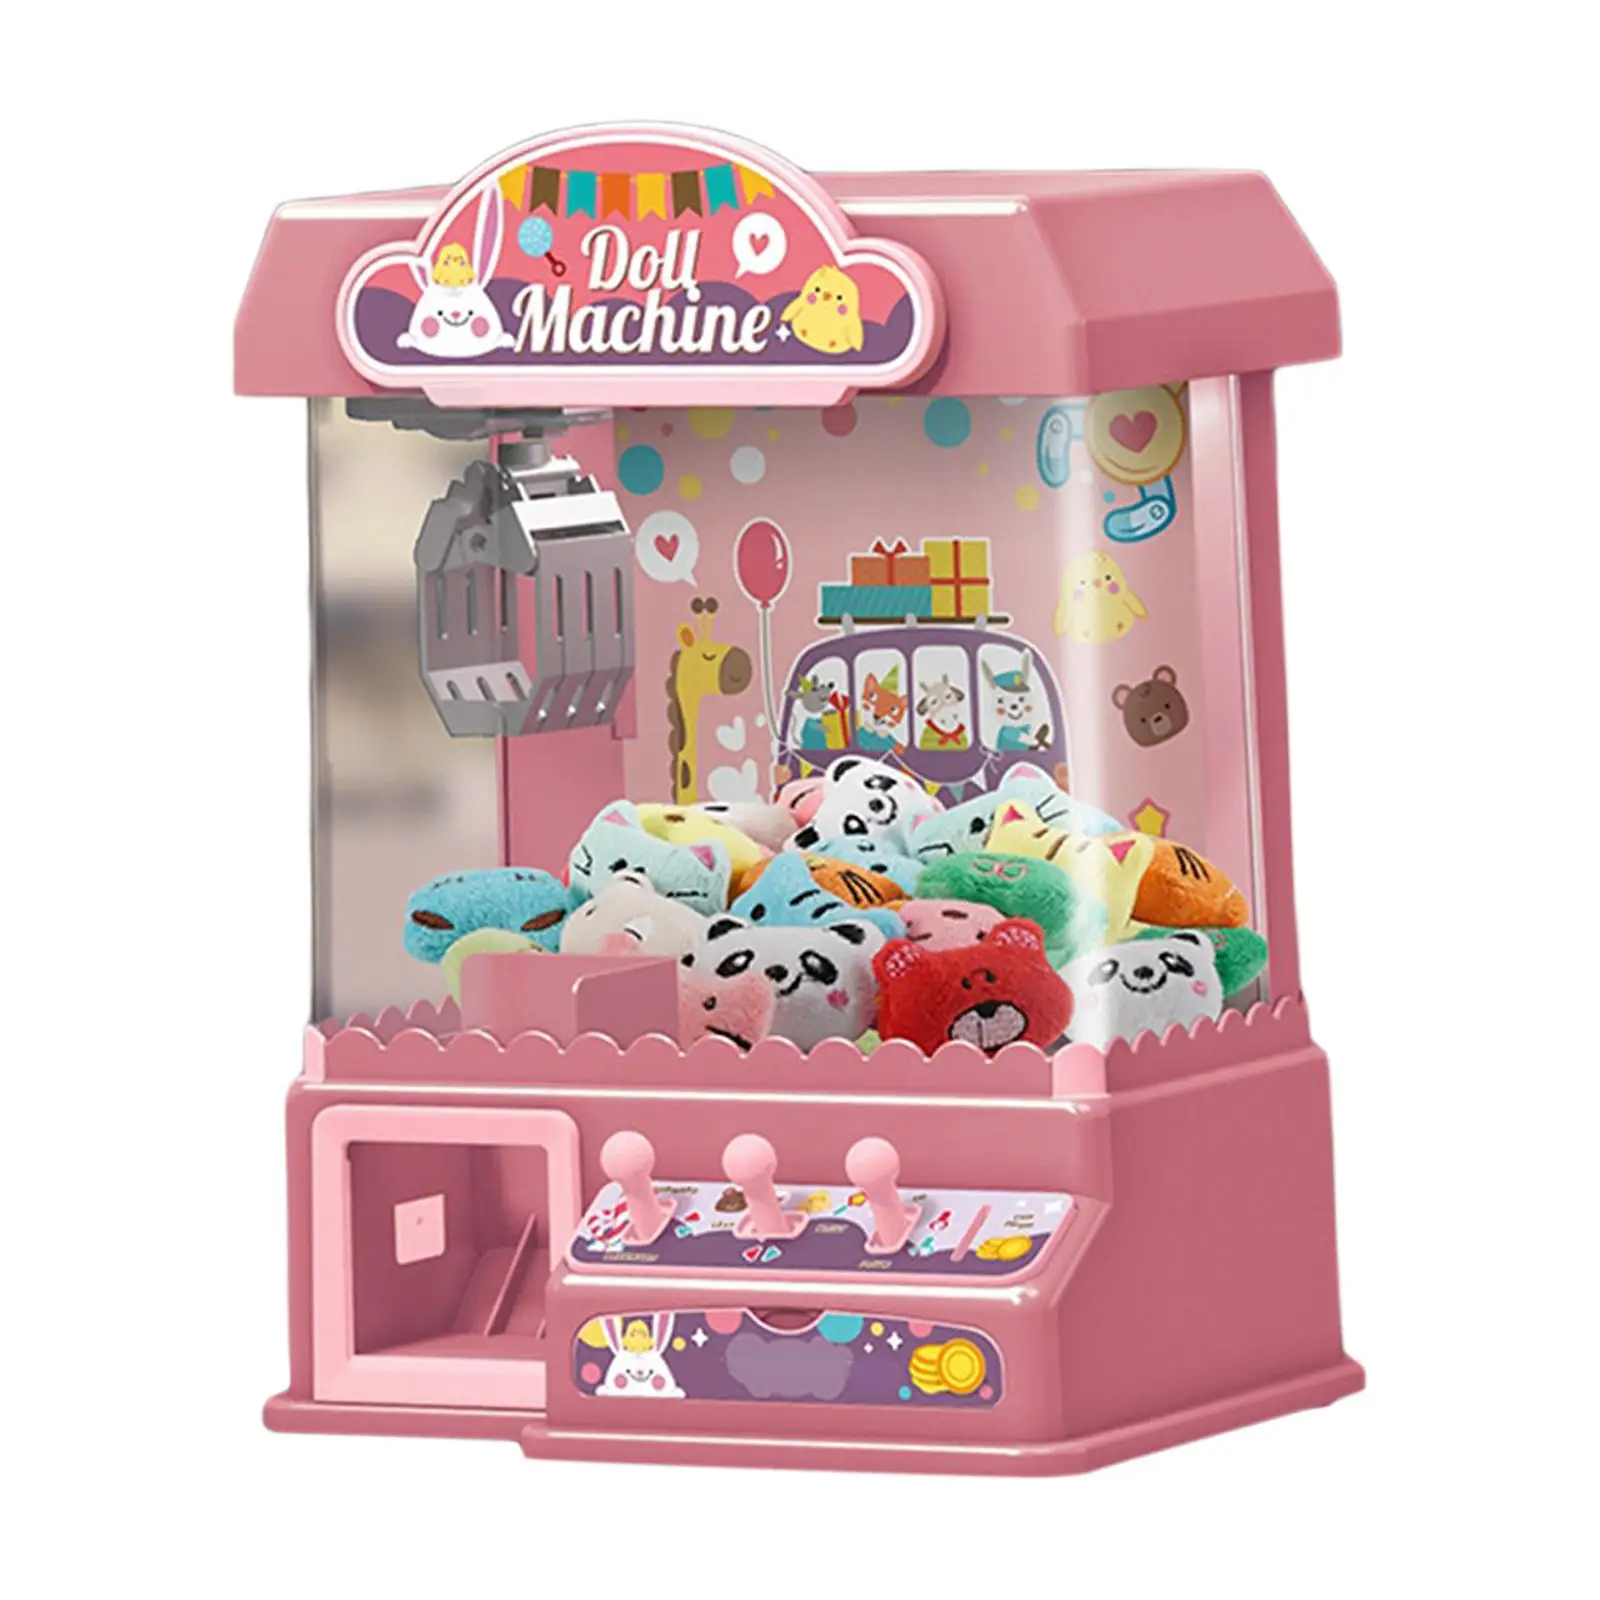 Claw Machine Manual Claw Cch Toy Practical for Outdoor Gift Indoor